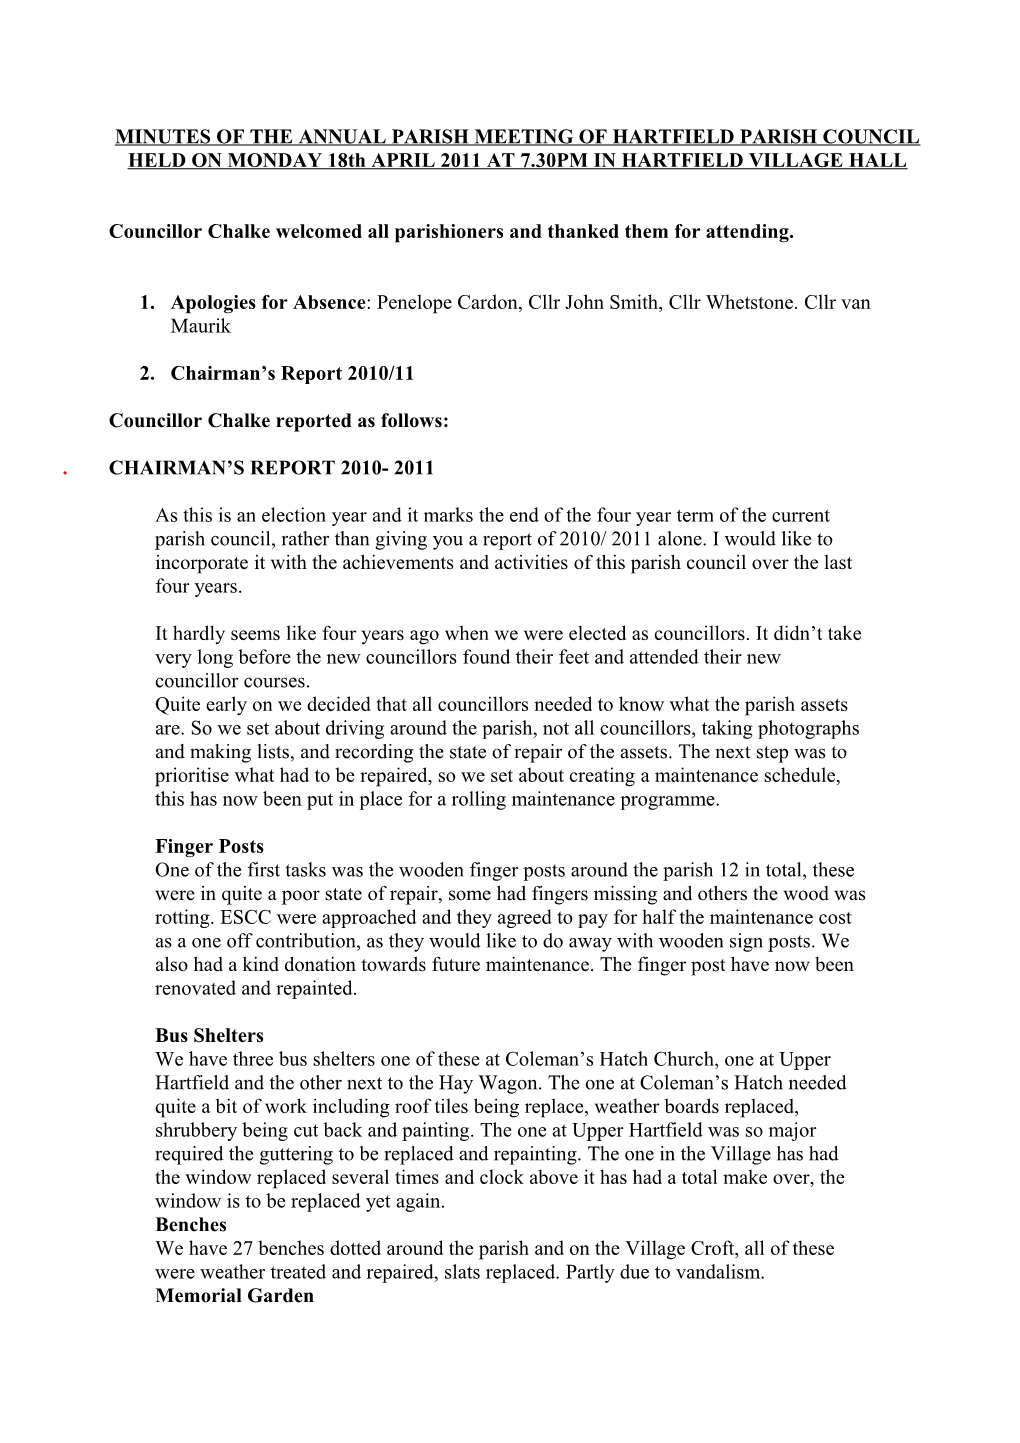 MINUTES of the ANNUAL PARISH MEETING of HARTFIELD PARISH COUNCIL HELD on MONDAY 23Rd APRIL